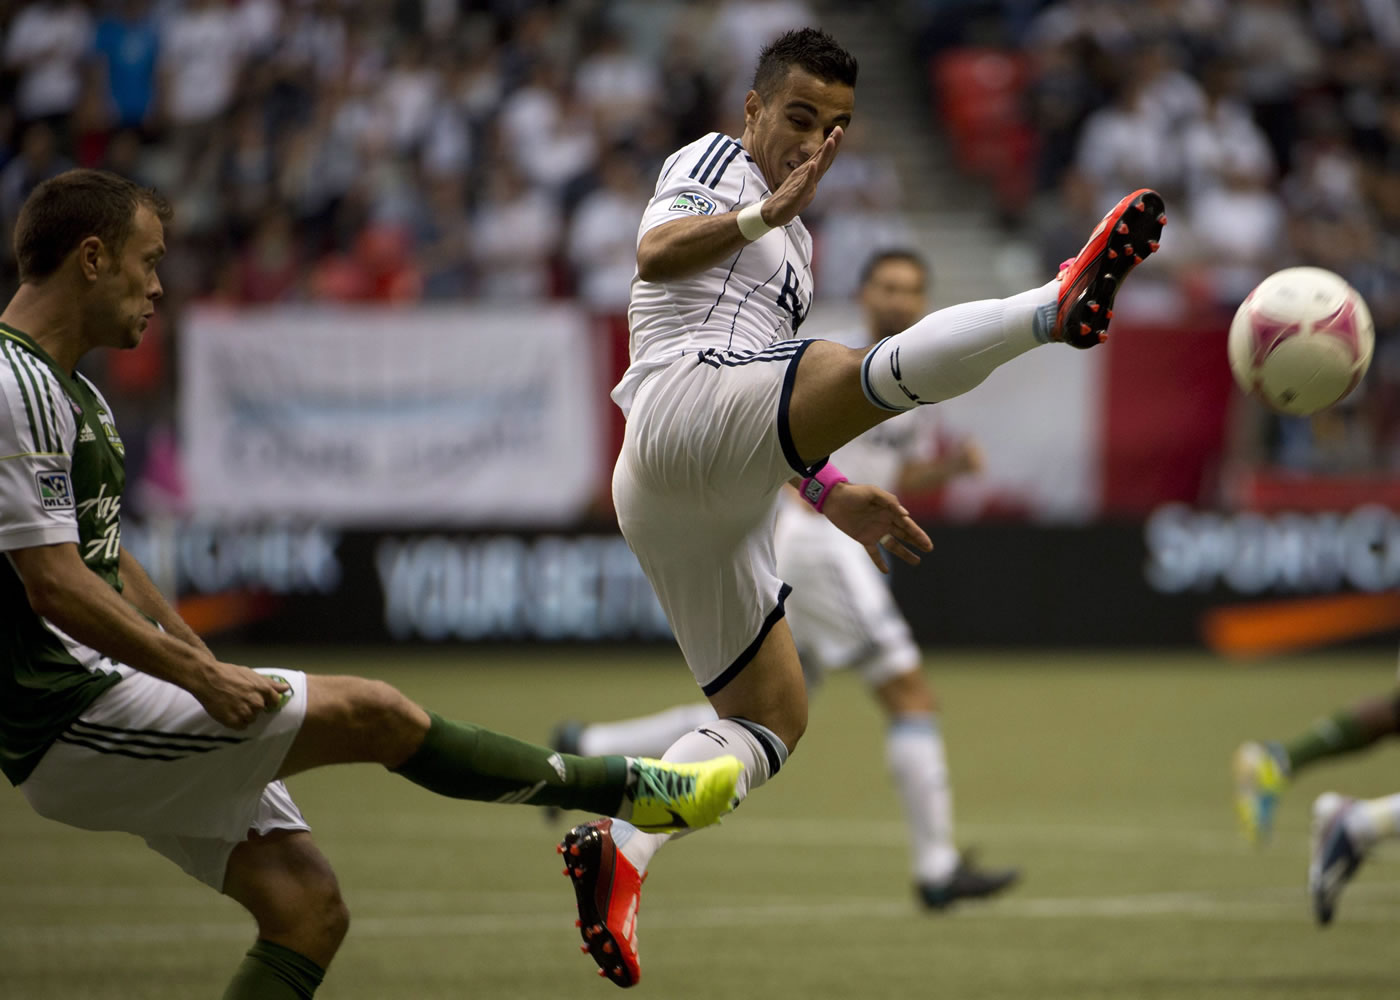 Vancouver Whitecaps Camilo Sanvezzo, right, fights for control of the ball with Portland Timbers Jack Jewsbury, left, during first half Sunday.